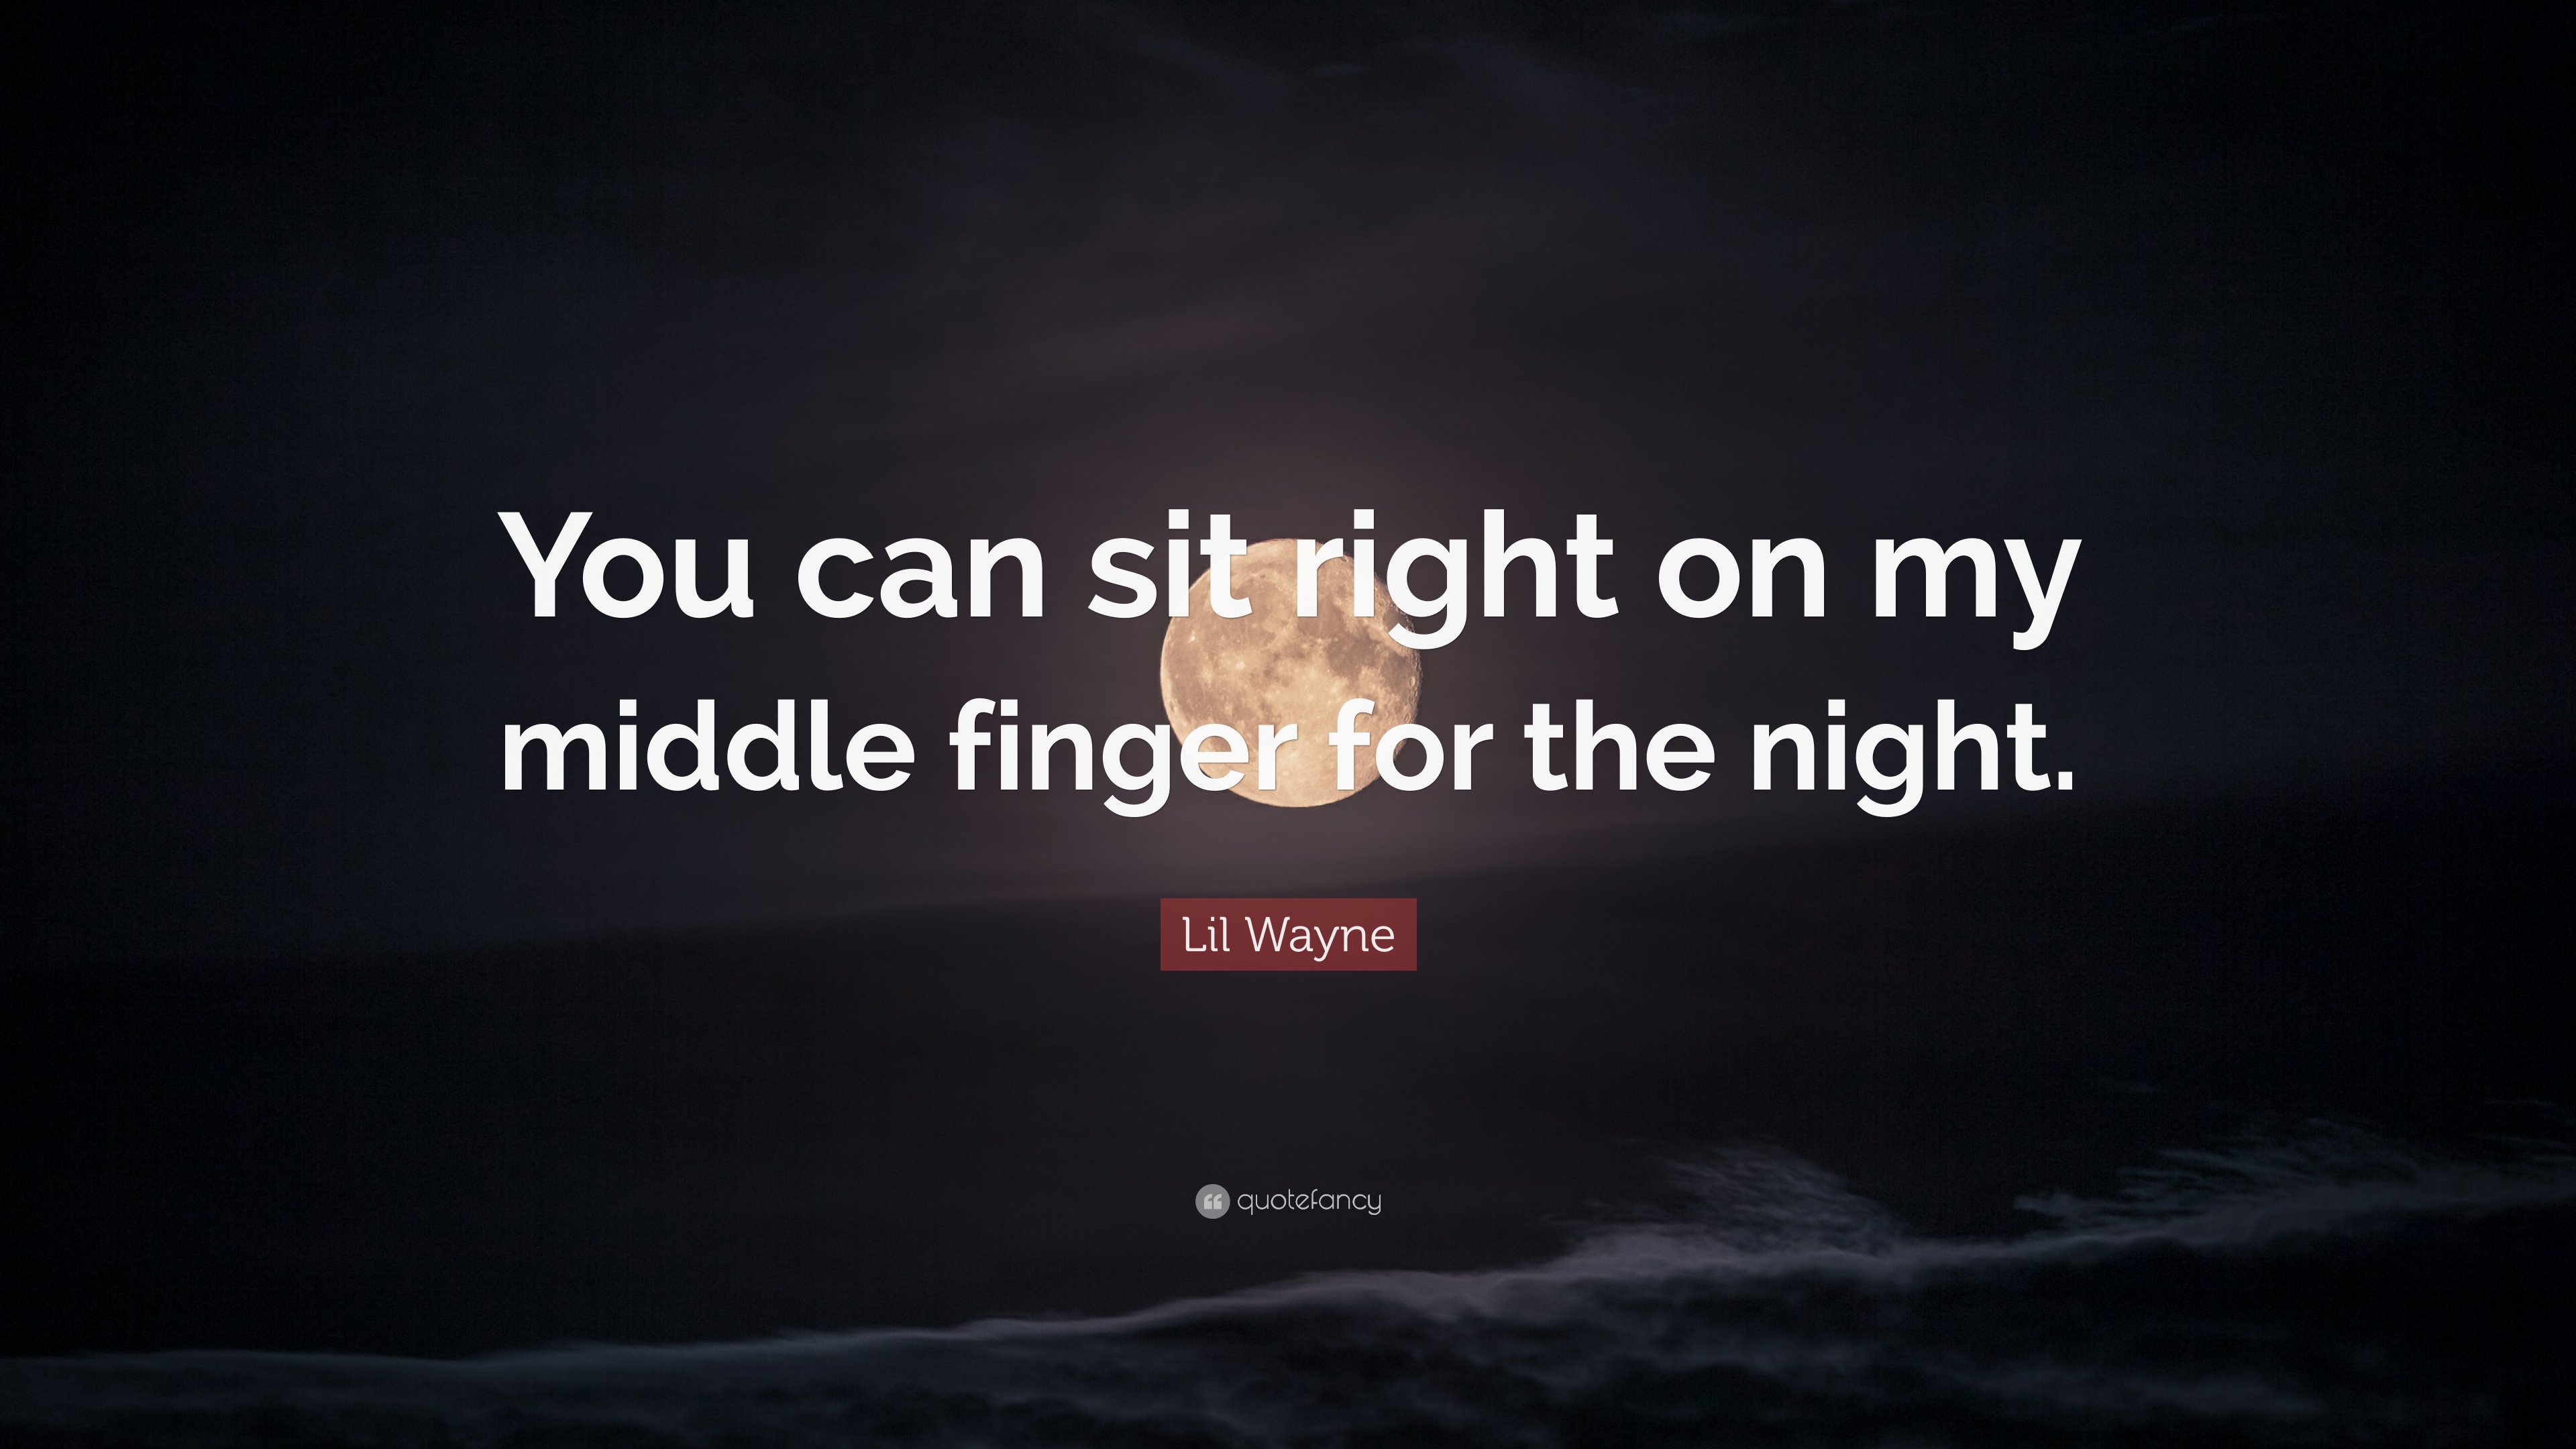 Lil Wayne Quote: “You can sit right on my middle finger